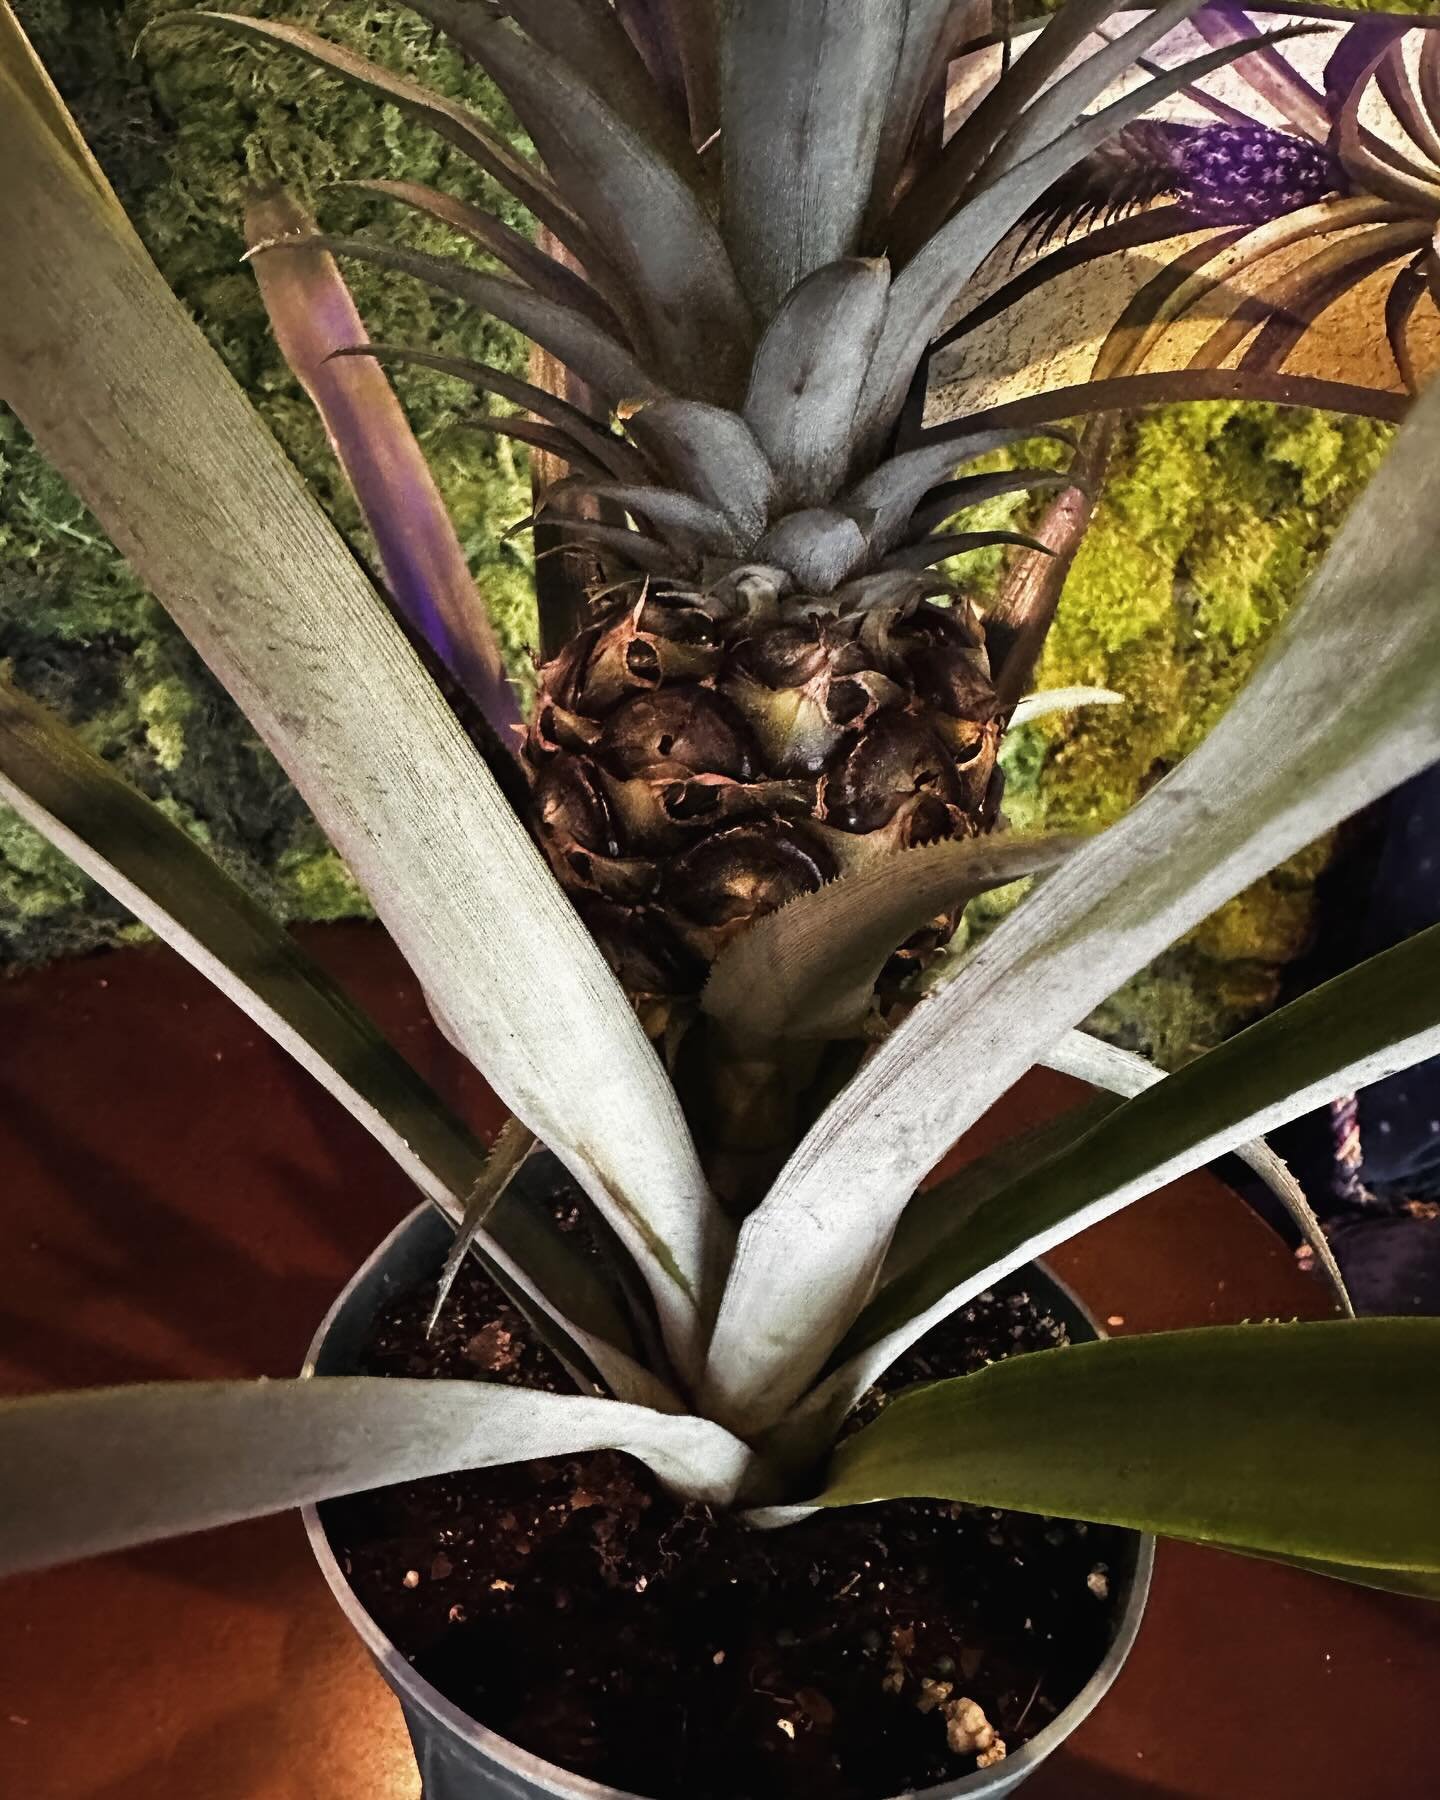 Happy Friday everyone! We have so many new plants for you to take home! Ever wanted a pineapple to grow in your house? Well, now is your chance! Check out our story for lots of other interesting new green friends we have in stock or come on in, grab 